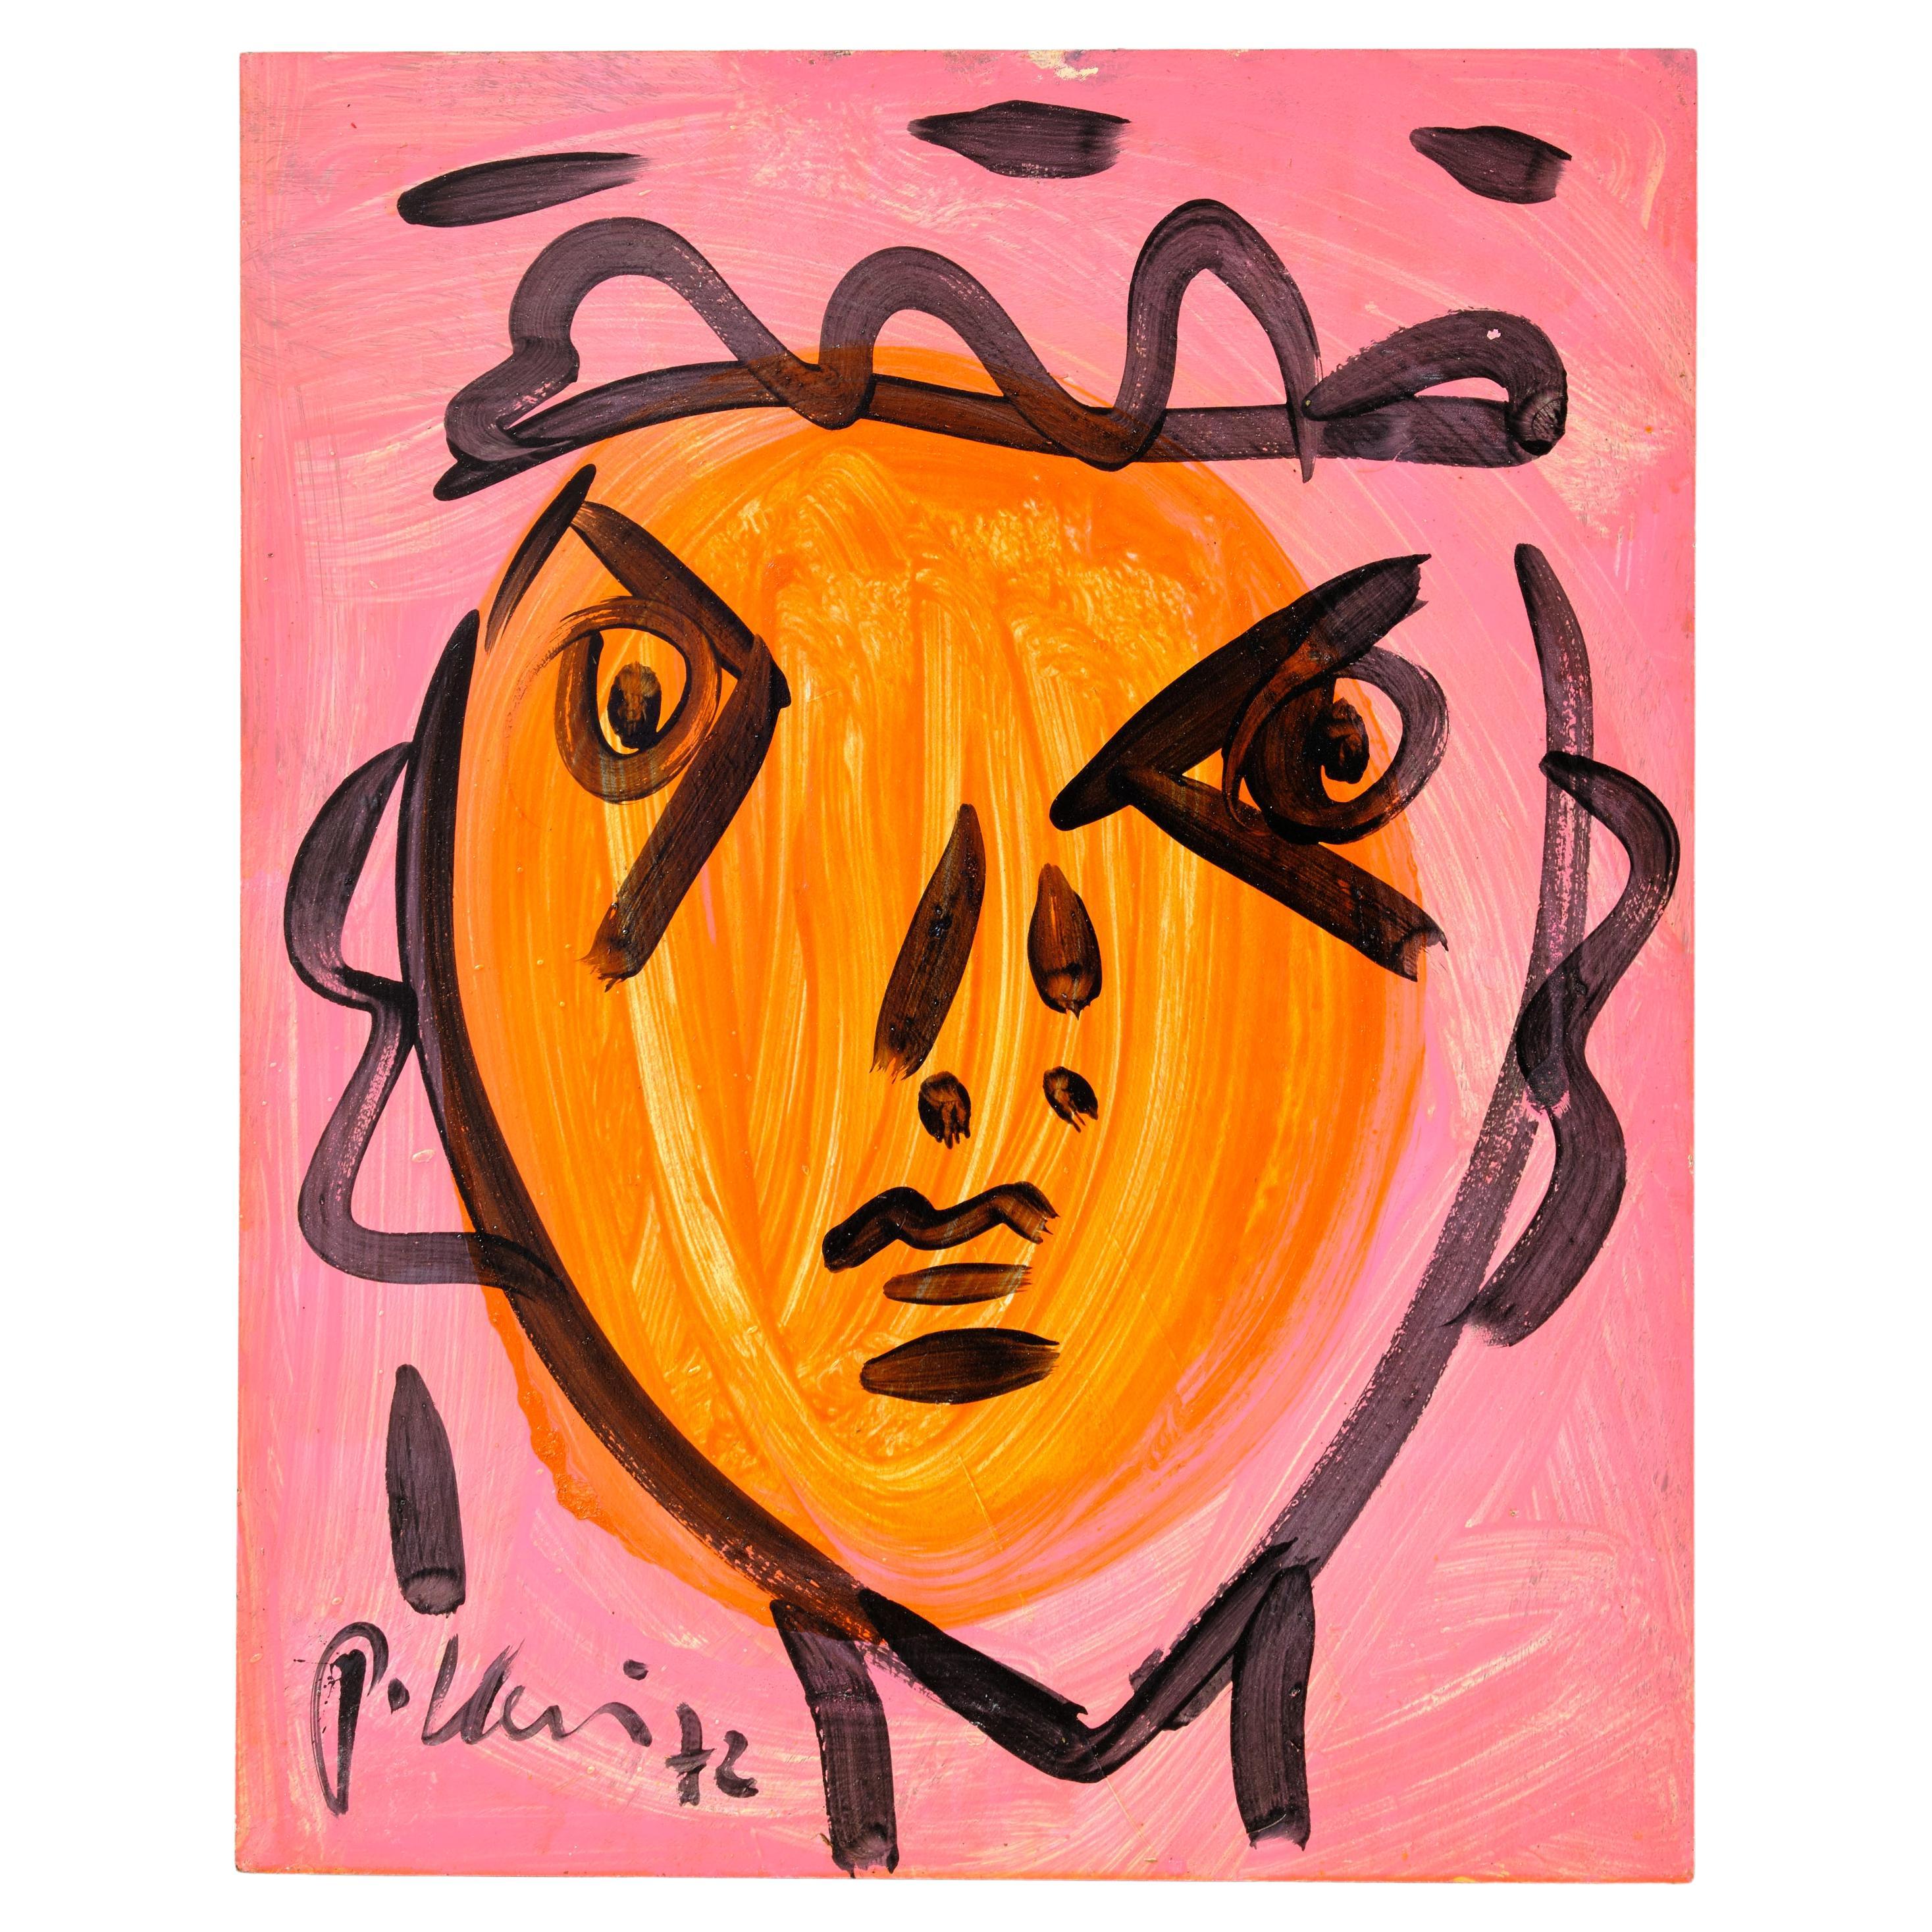 Painting by Peter Keil, Pink and Orange Painted on Board, Modern Art, C 1972